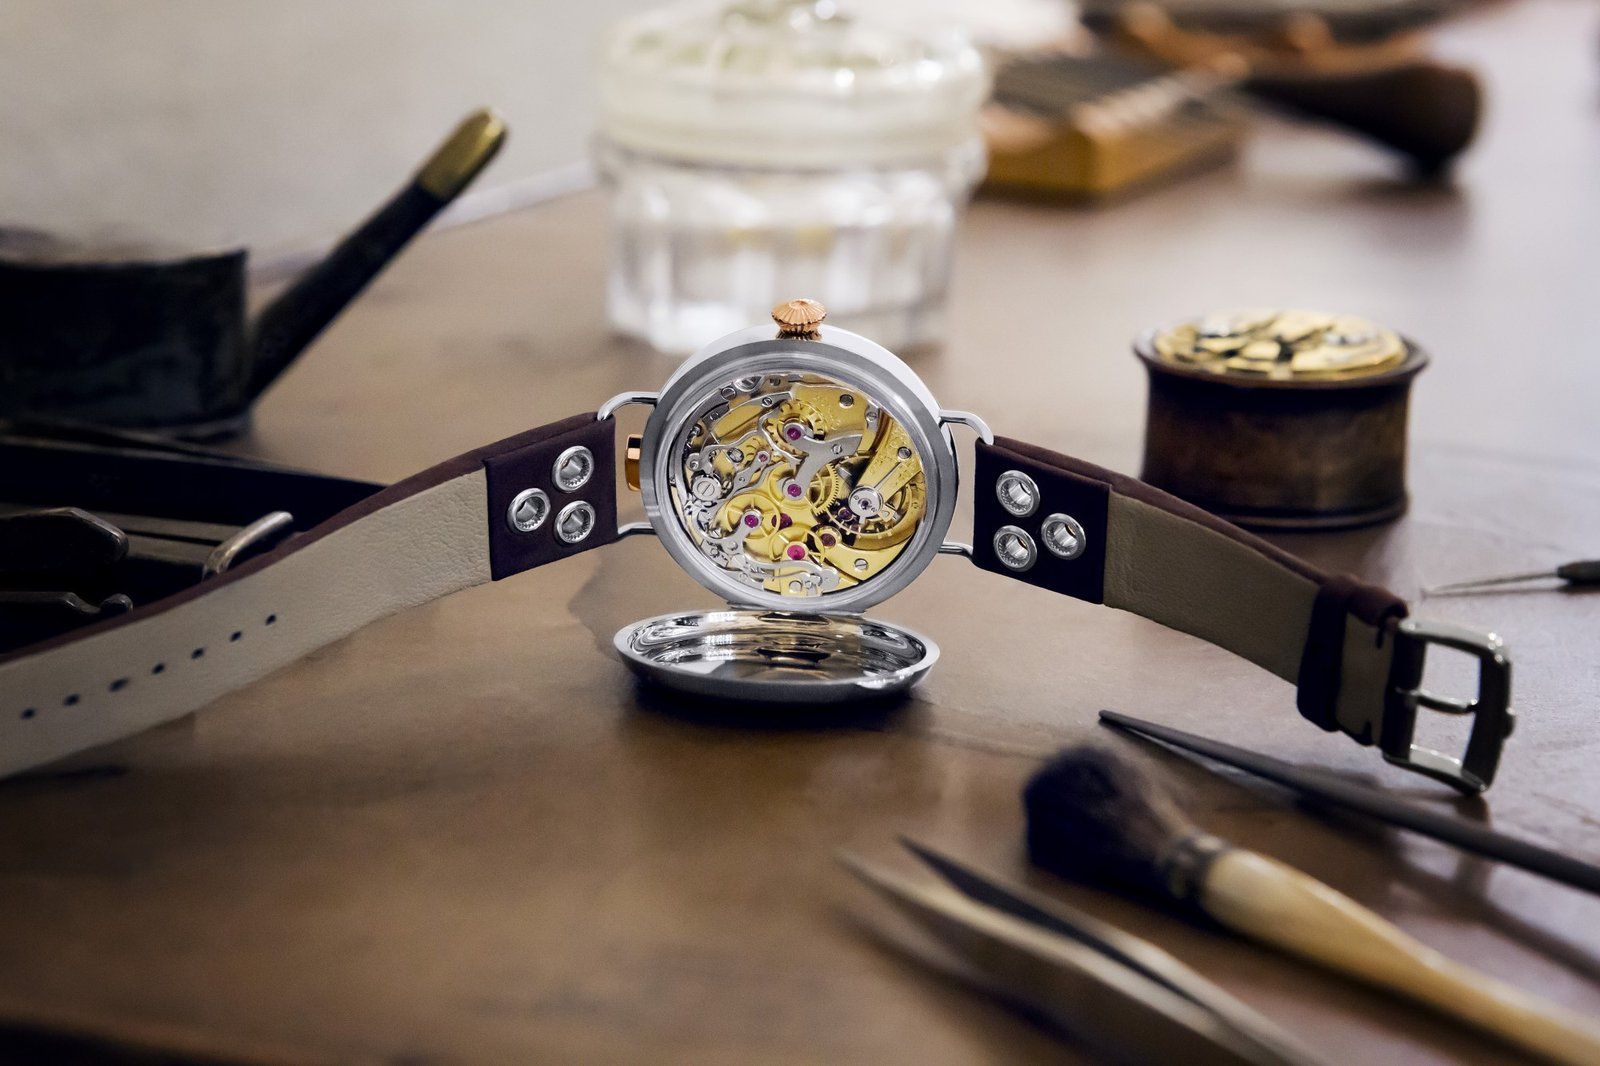 The treasured calibres have been tastefully reconditioned by the professionals at OMEGA's Atelier Tourbillon.